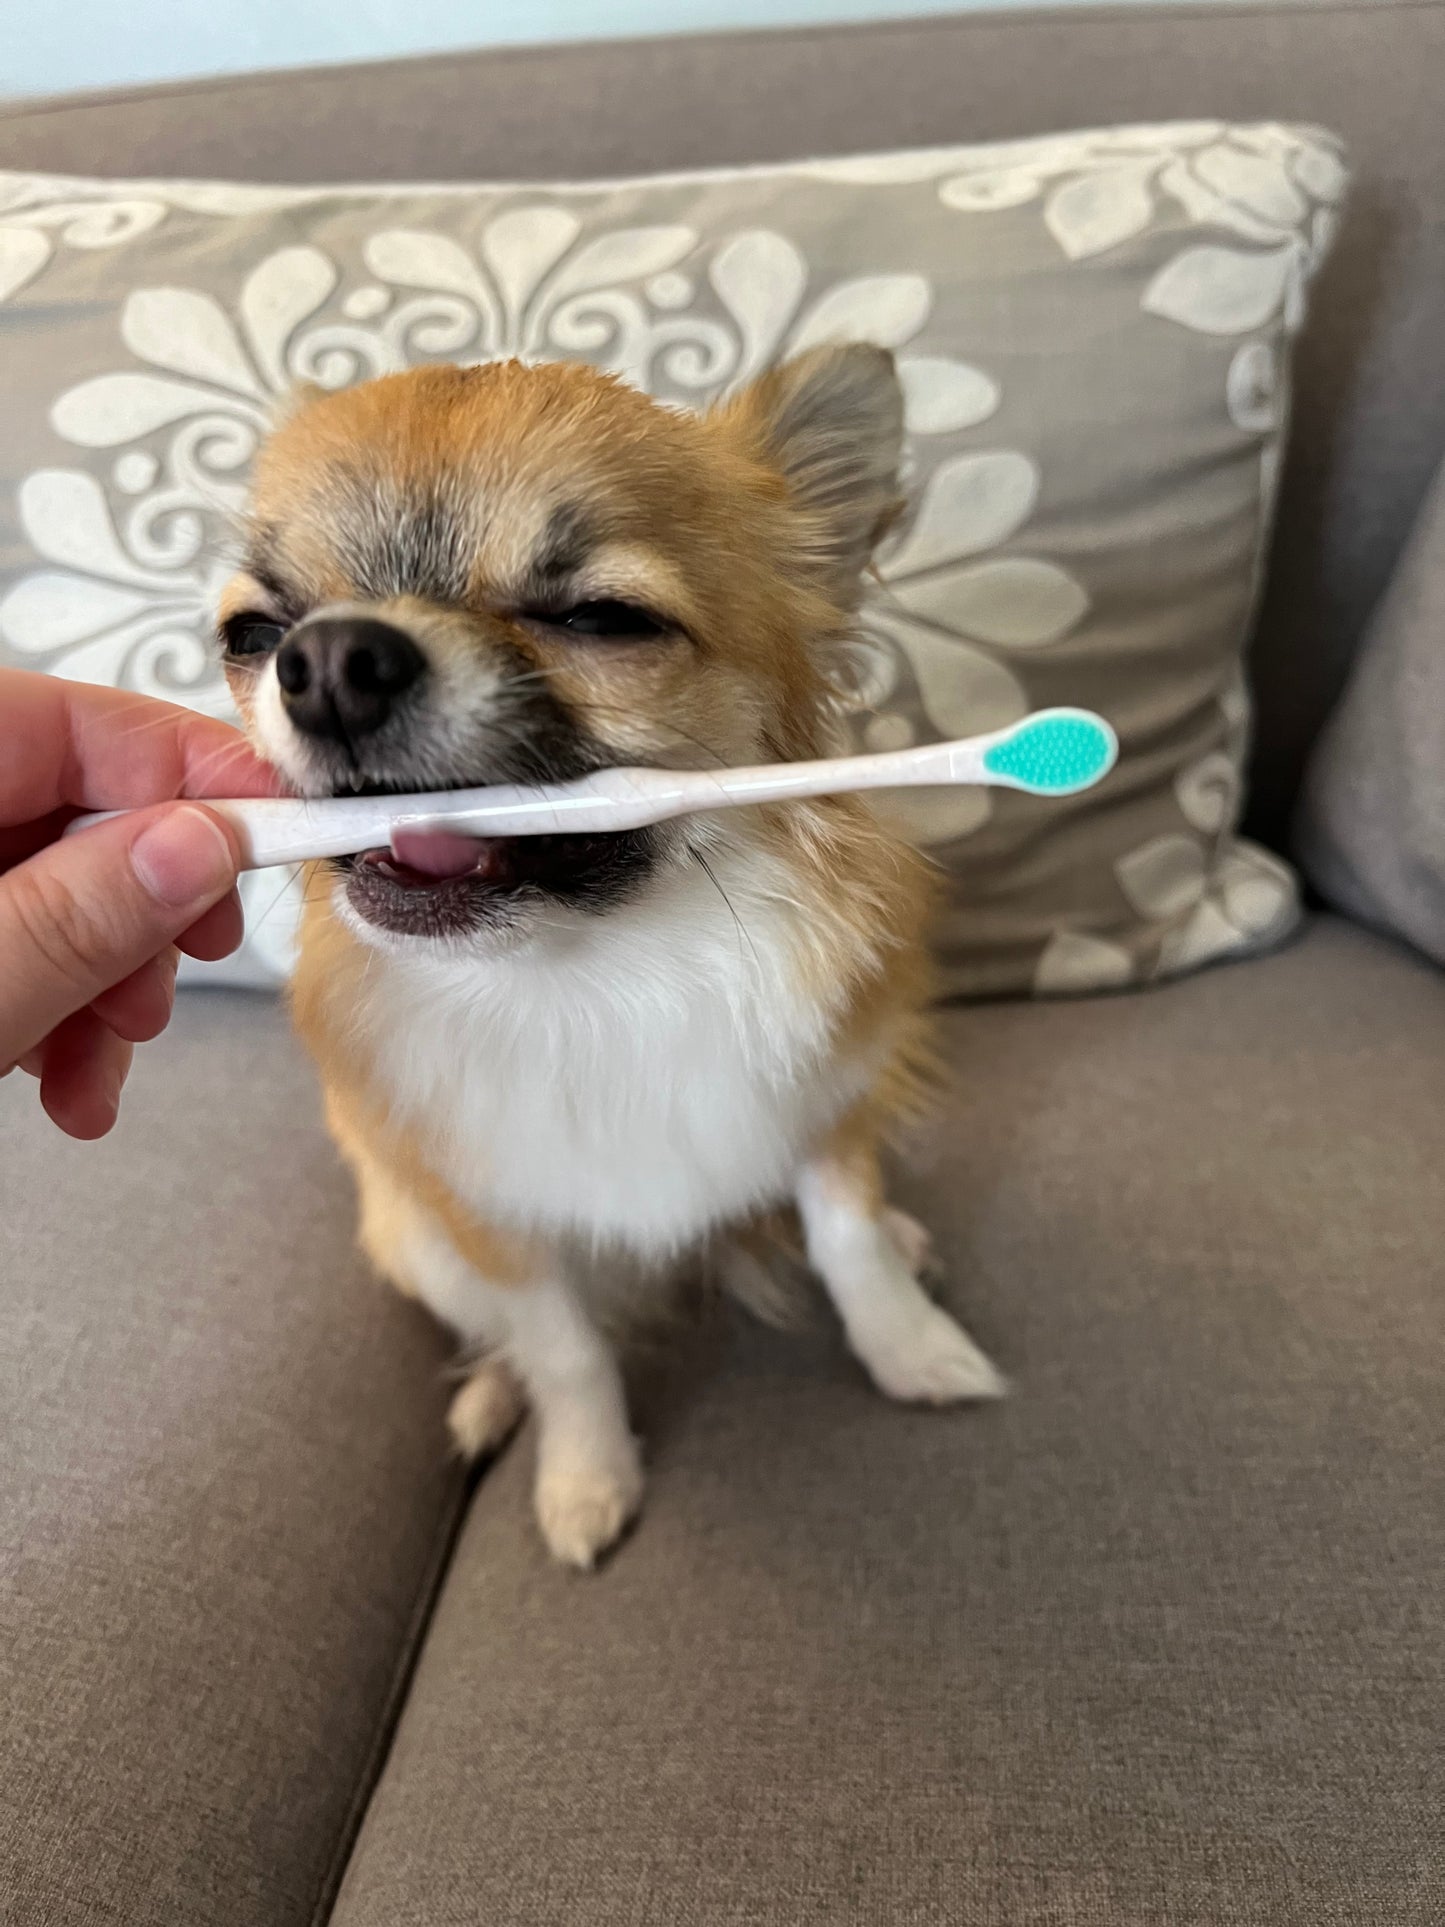 Puppy Polisher Pearl Eco Toothbrush (XS/S)